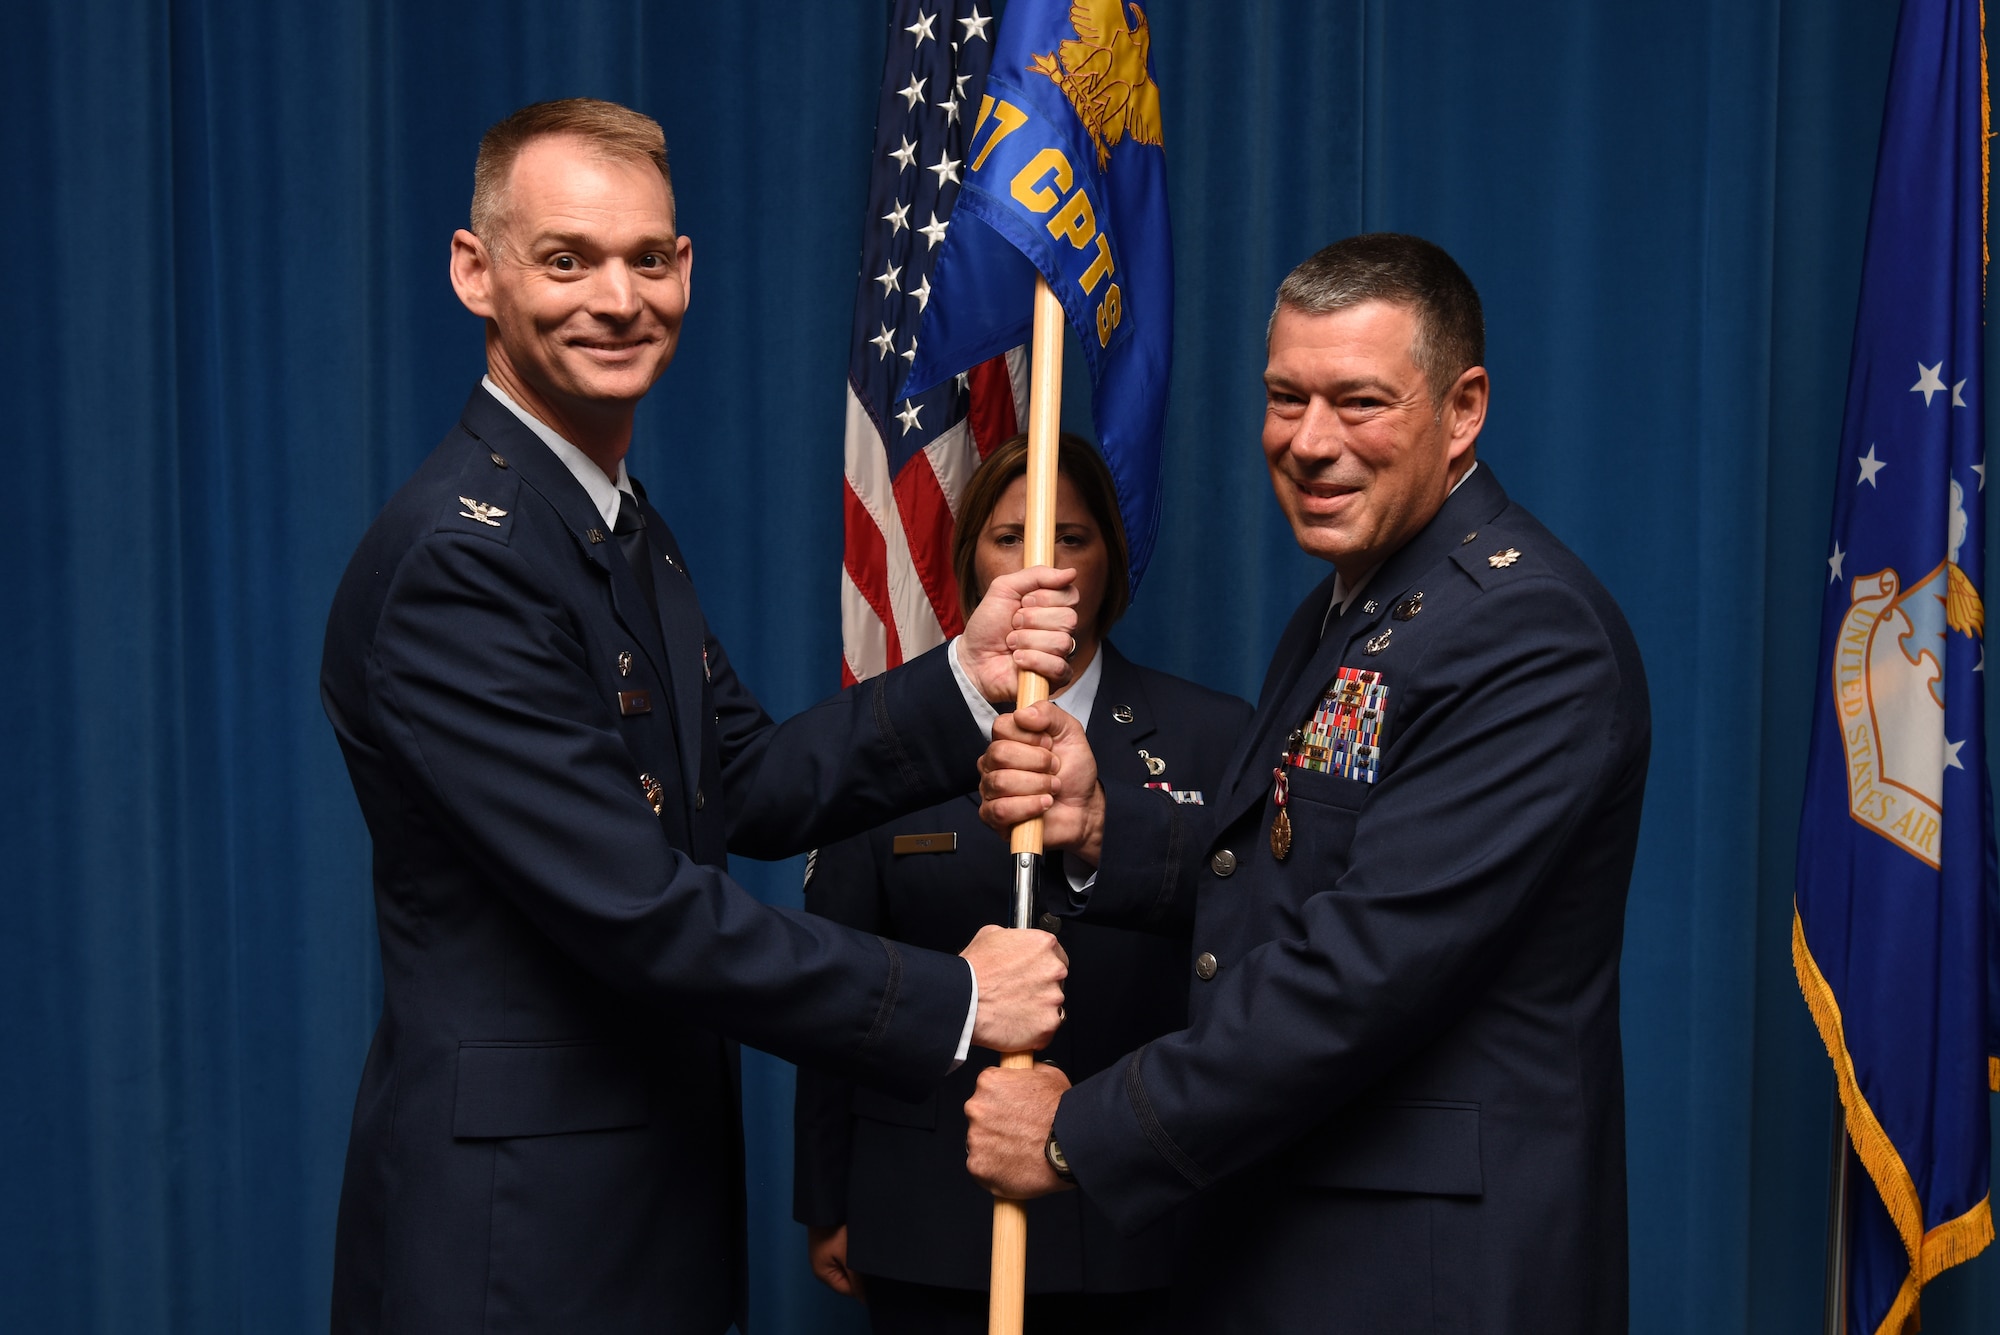 U.S. Air Force Lt. Col. William Beauter (right), outgoing 377th Comptroller Squadron commander, passes the guidon to Col. David Miller, 377th Air Base Wing commander, during a change of command ceremony at Kirtland Air Force Base, N.M., July 31, 2019. Beauter is scheduled to assume command of Reserve Officer Training Corps Det. 510. (U.S. Air Force photo by Senior Airman Eli Chevalier)